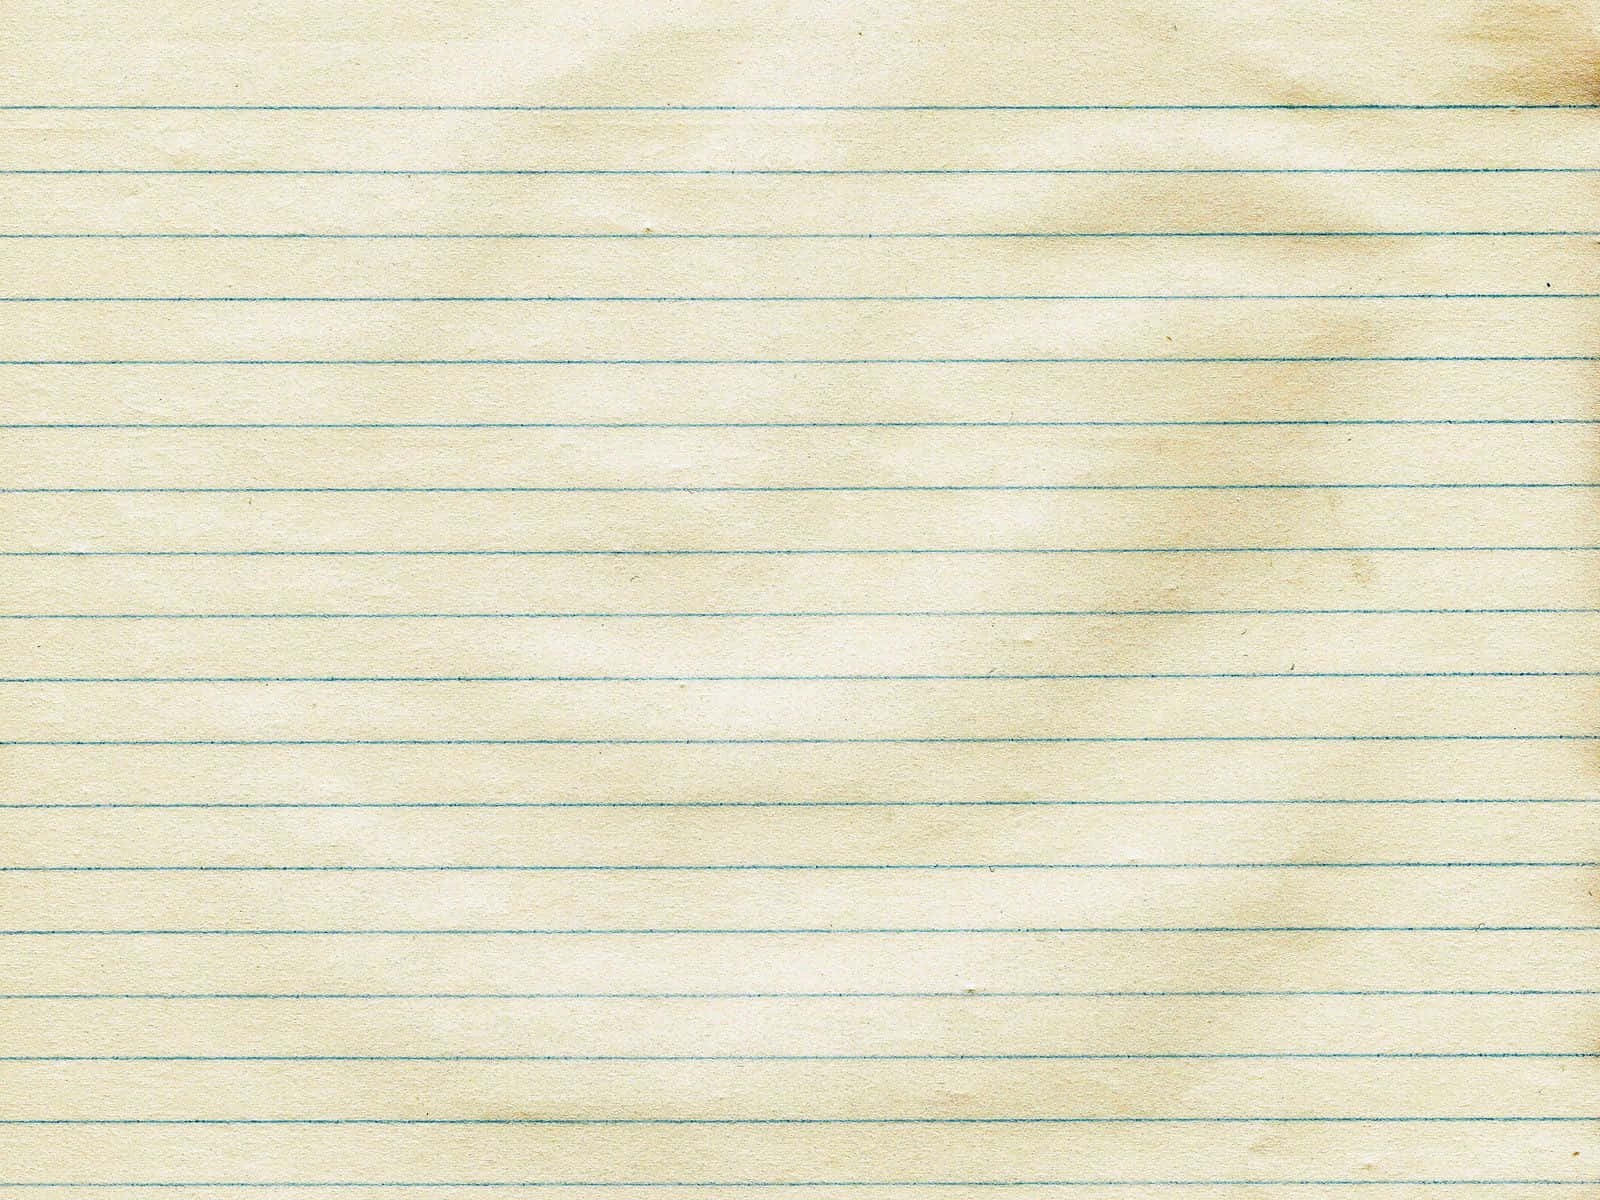 Lined Paper Background Images  Free Download on Freepik